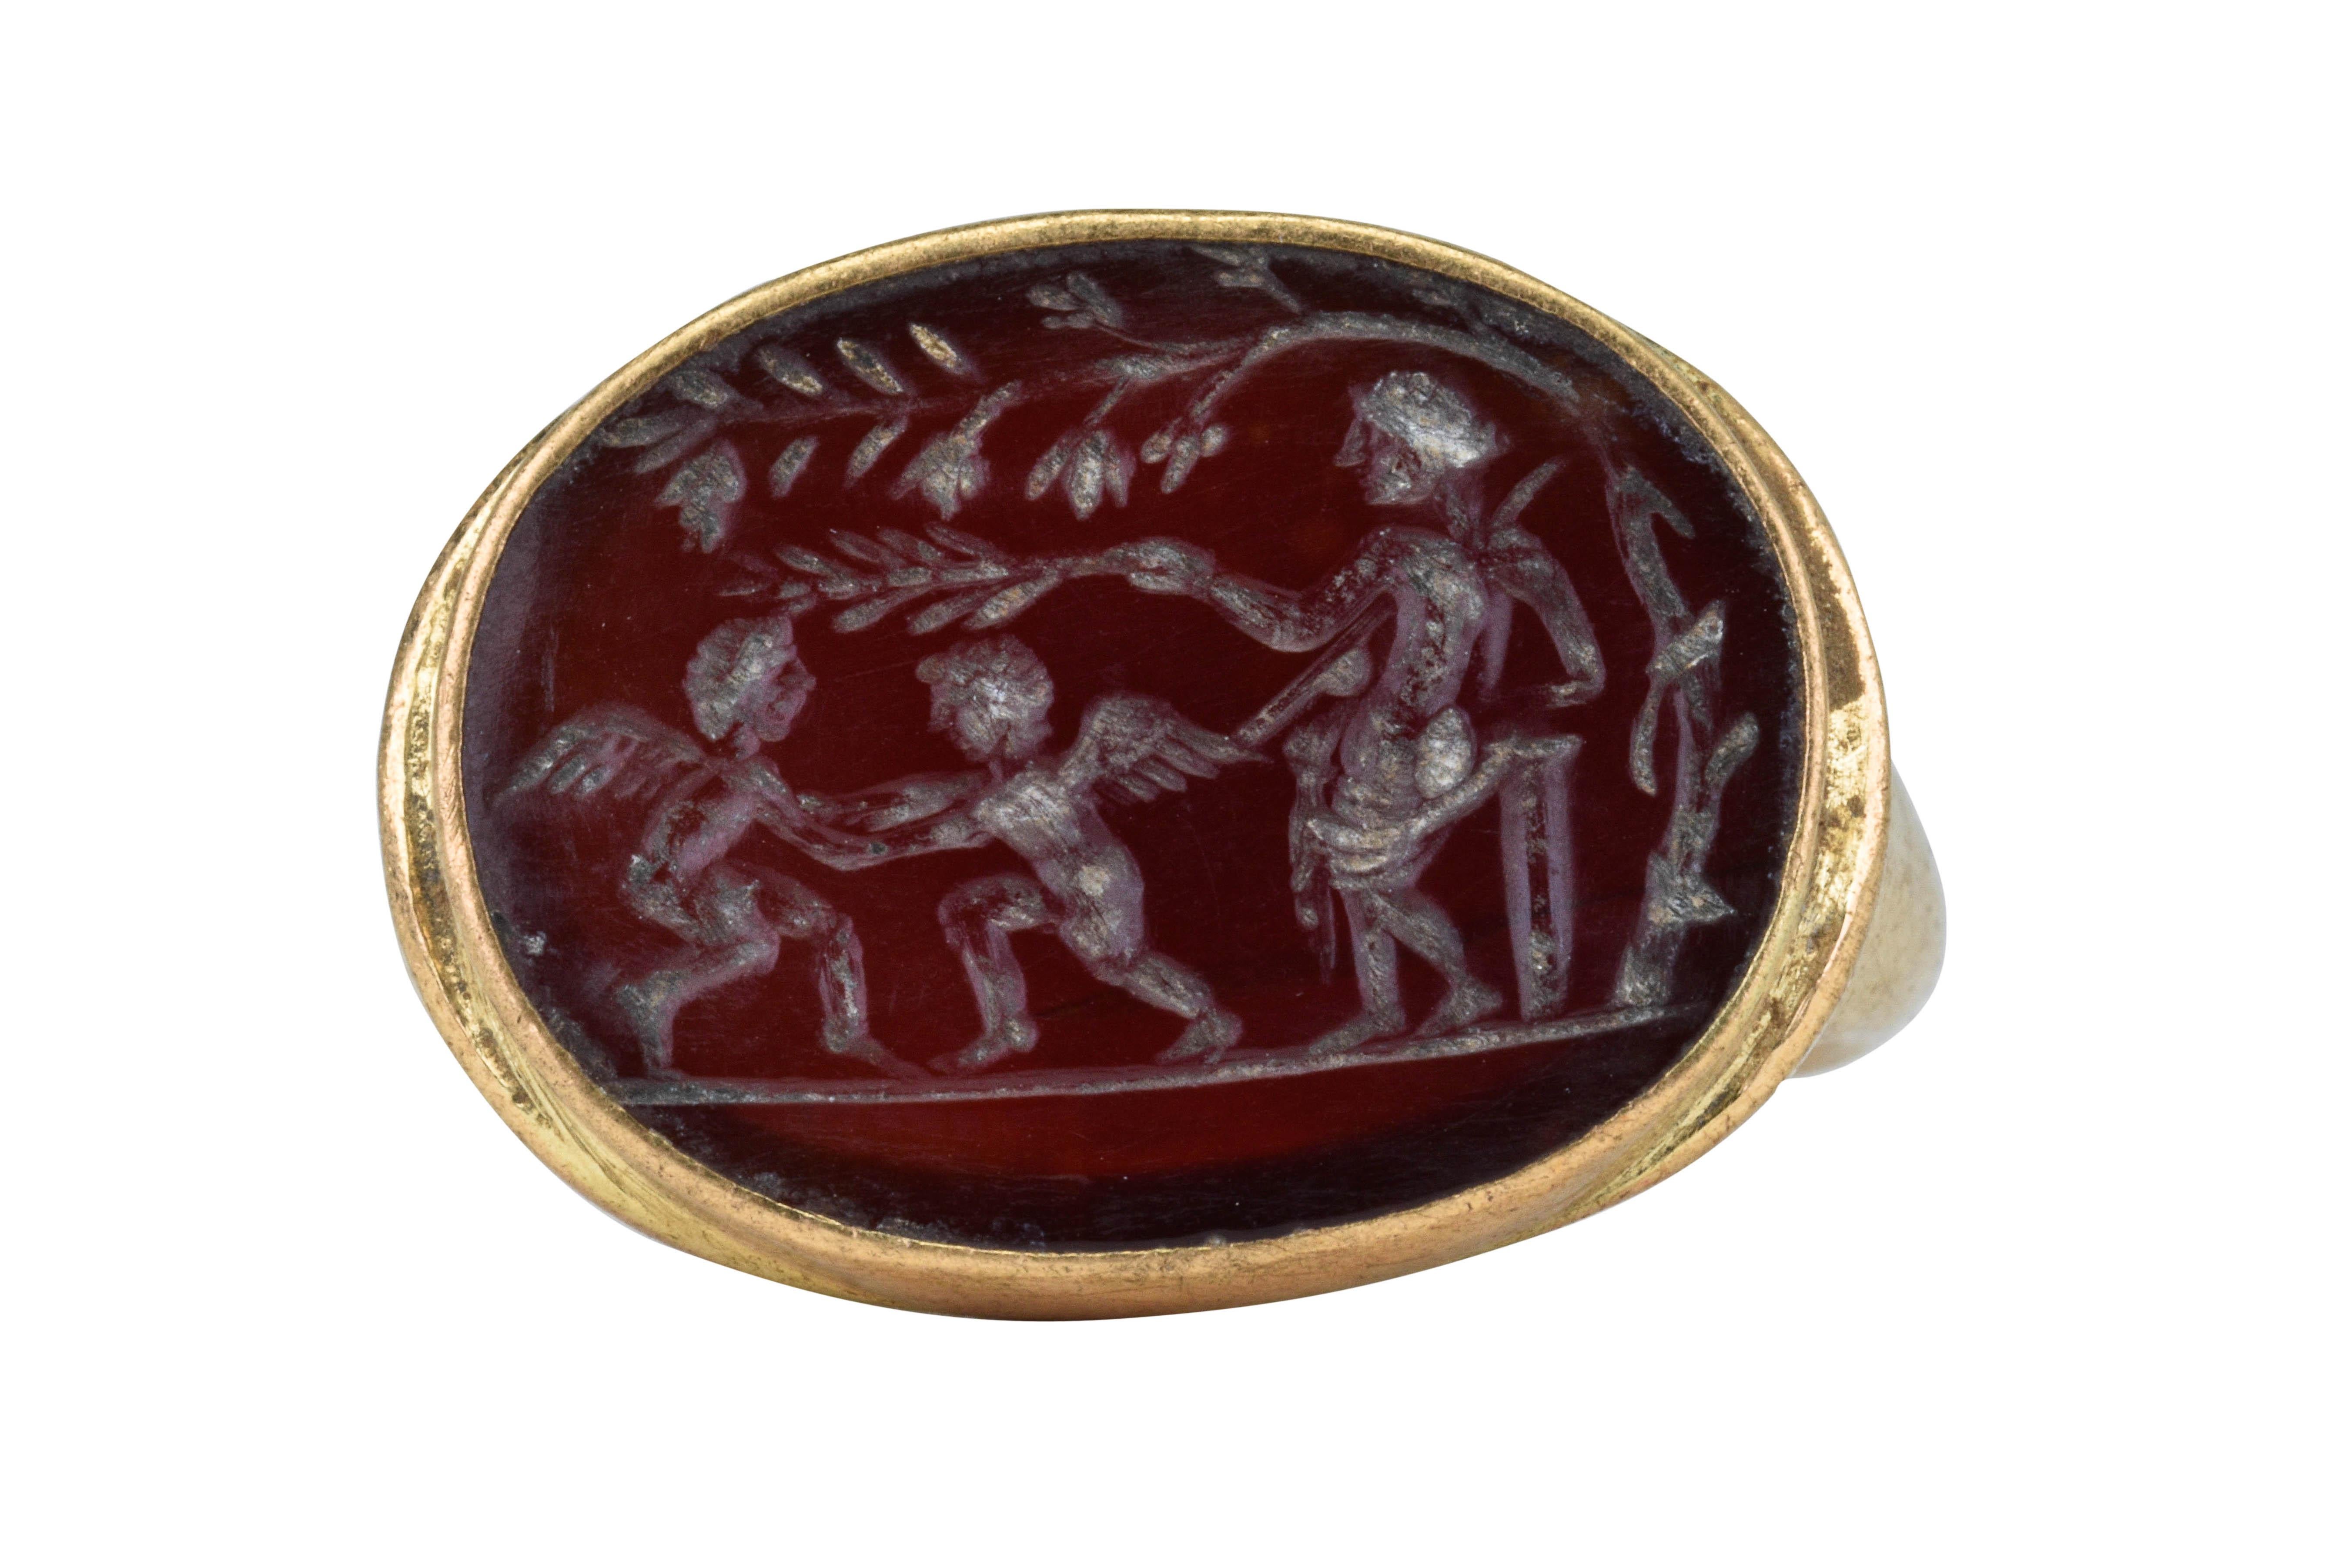 Ancient Roman Gold Intaglio Signet Ring with Venus and Two Fighting Cupids

Ca. 100-300 AD 

An Ancient Roman gold signet ring composed of a carinated-section round hoop rising to a large, oval bezel containing a carnelian intaglio engraved with a